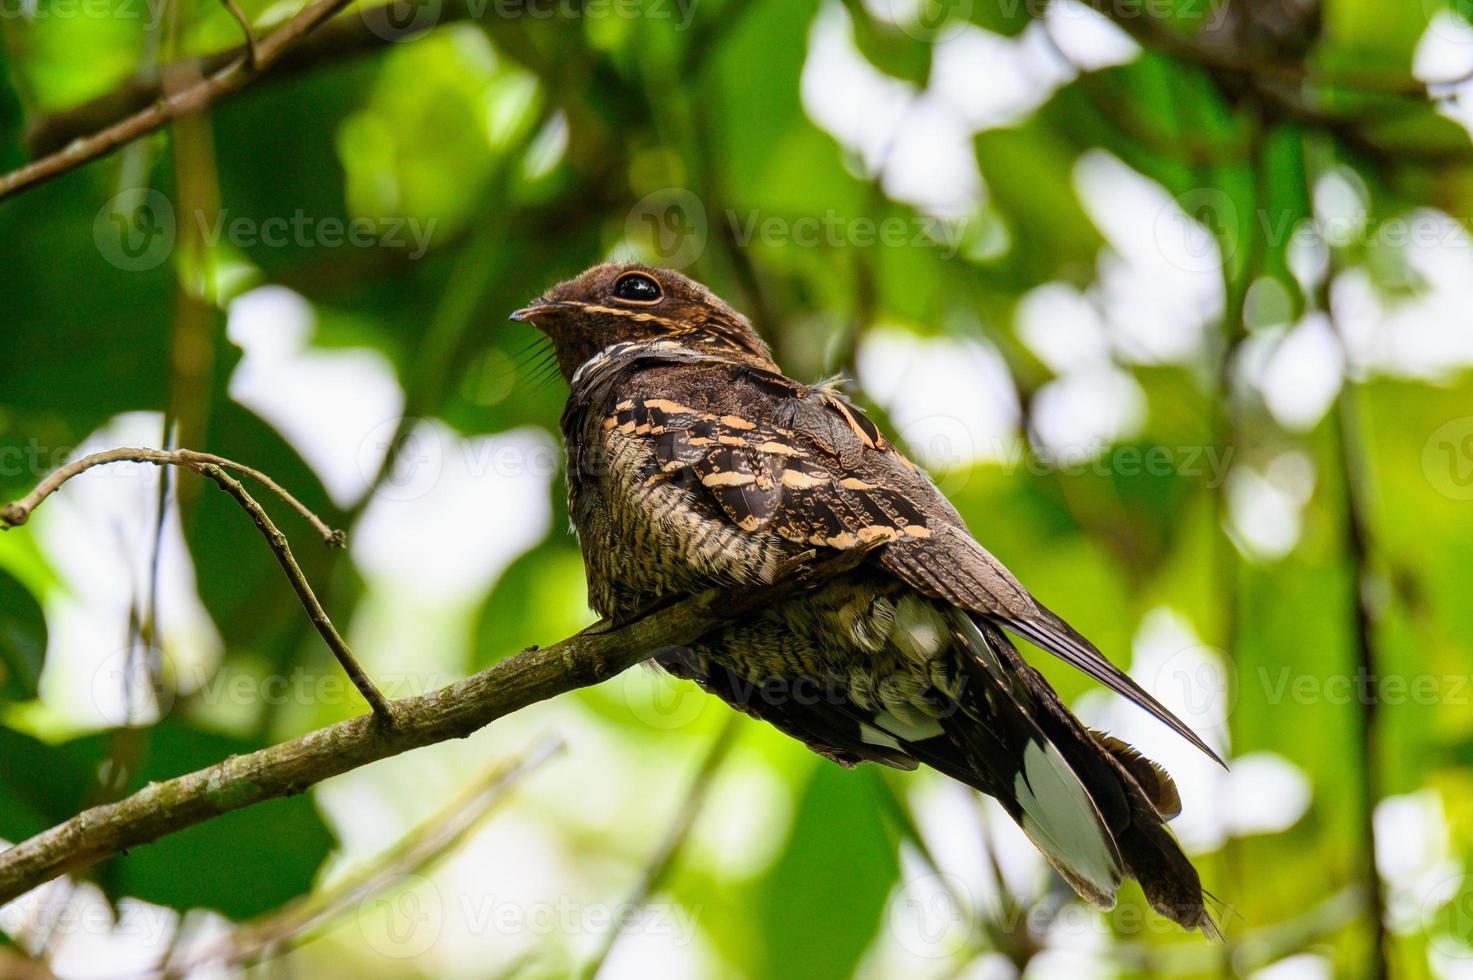 Large-tailed nightjar bird on branch of tree in forest photo